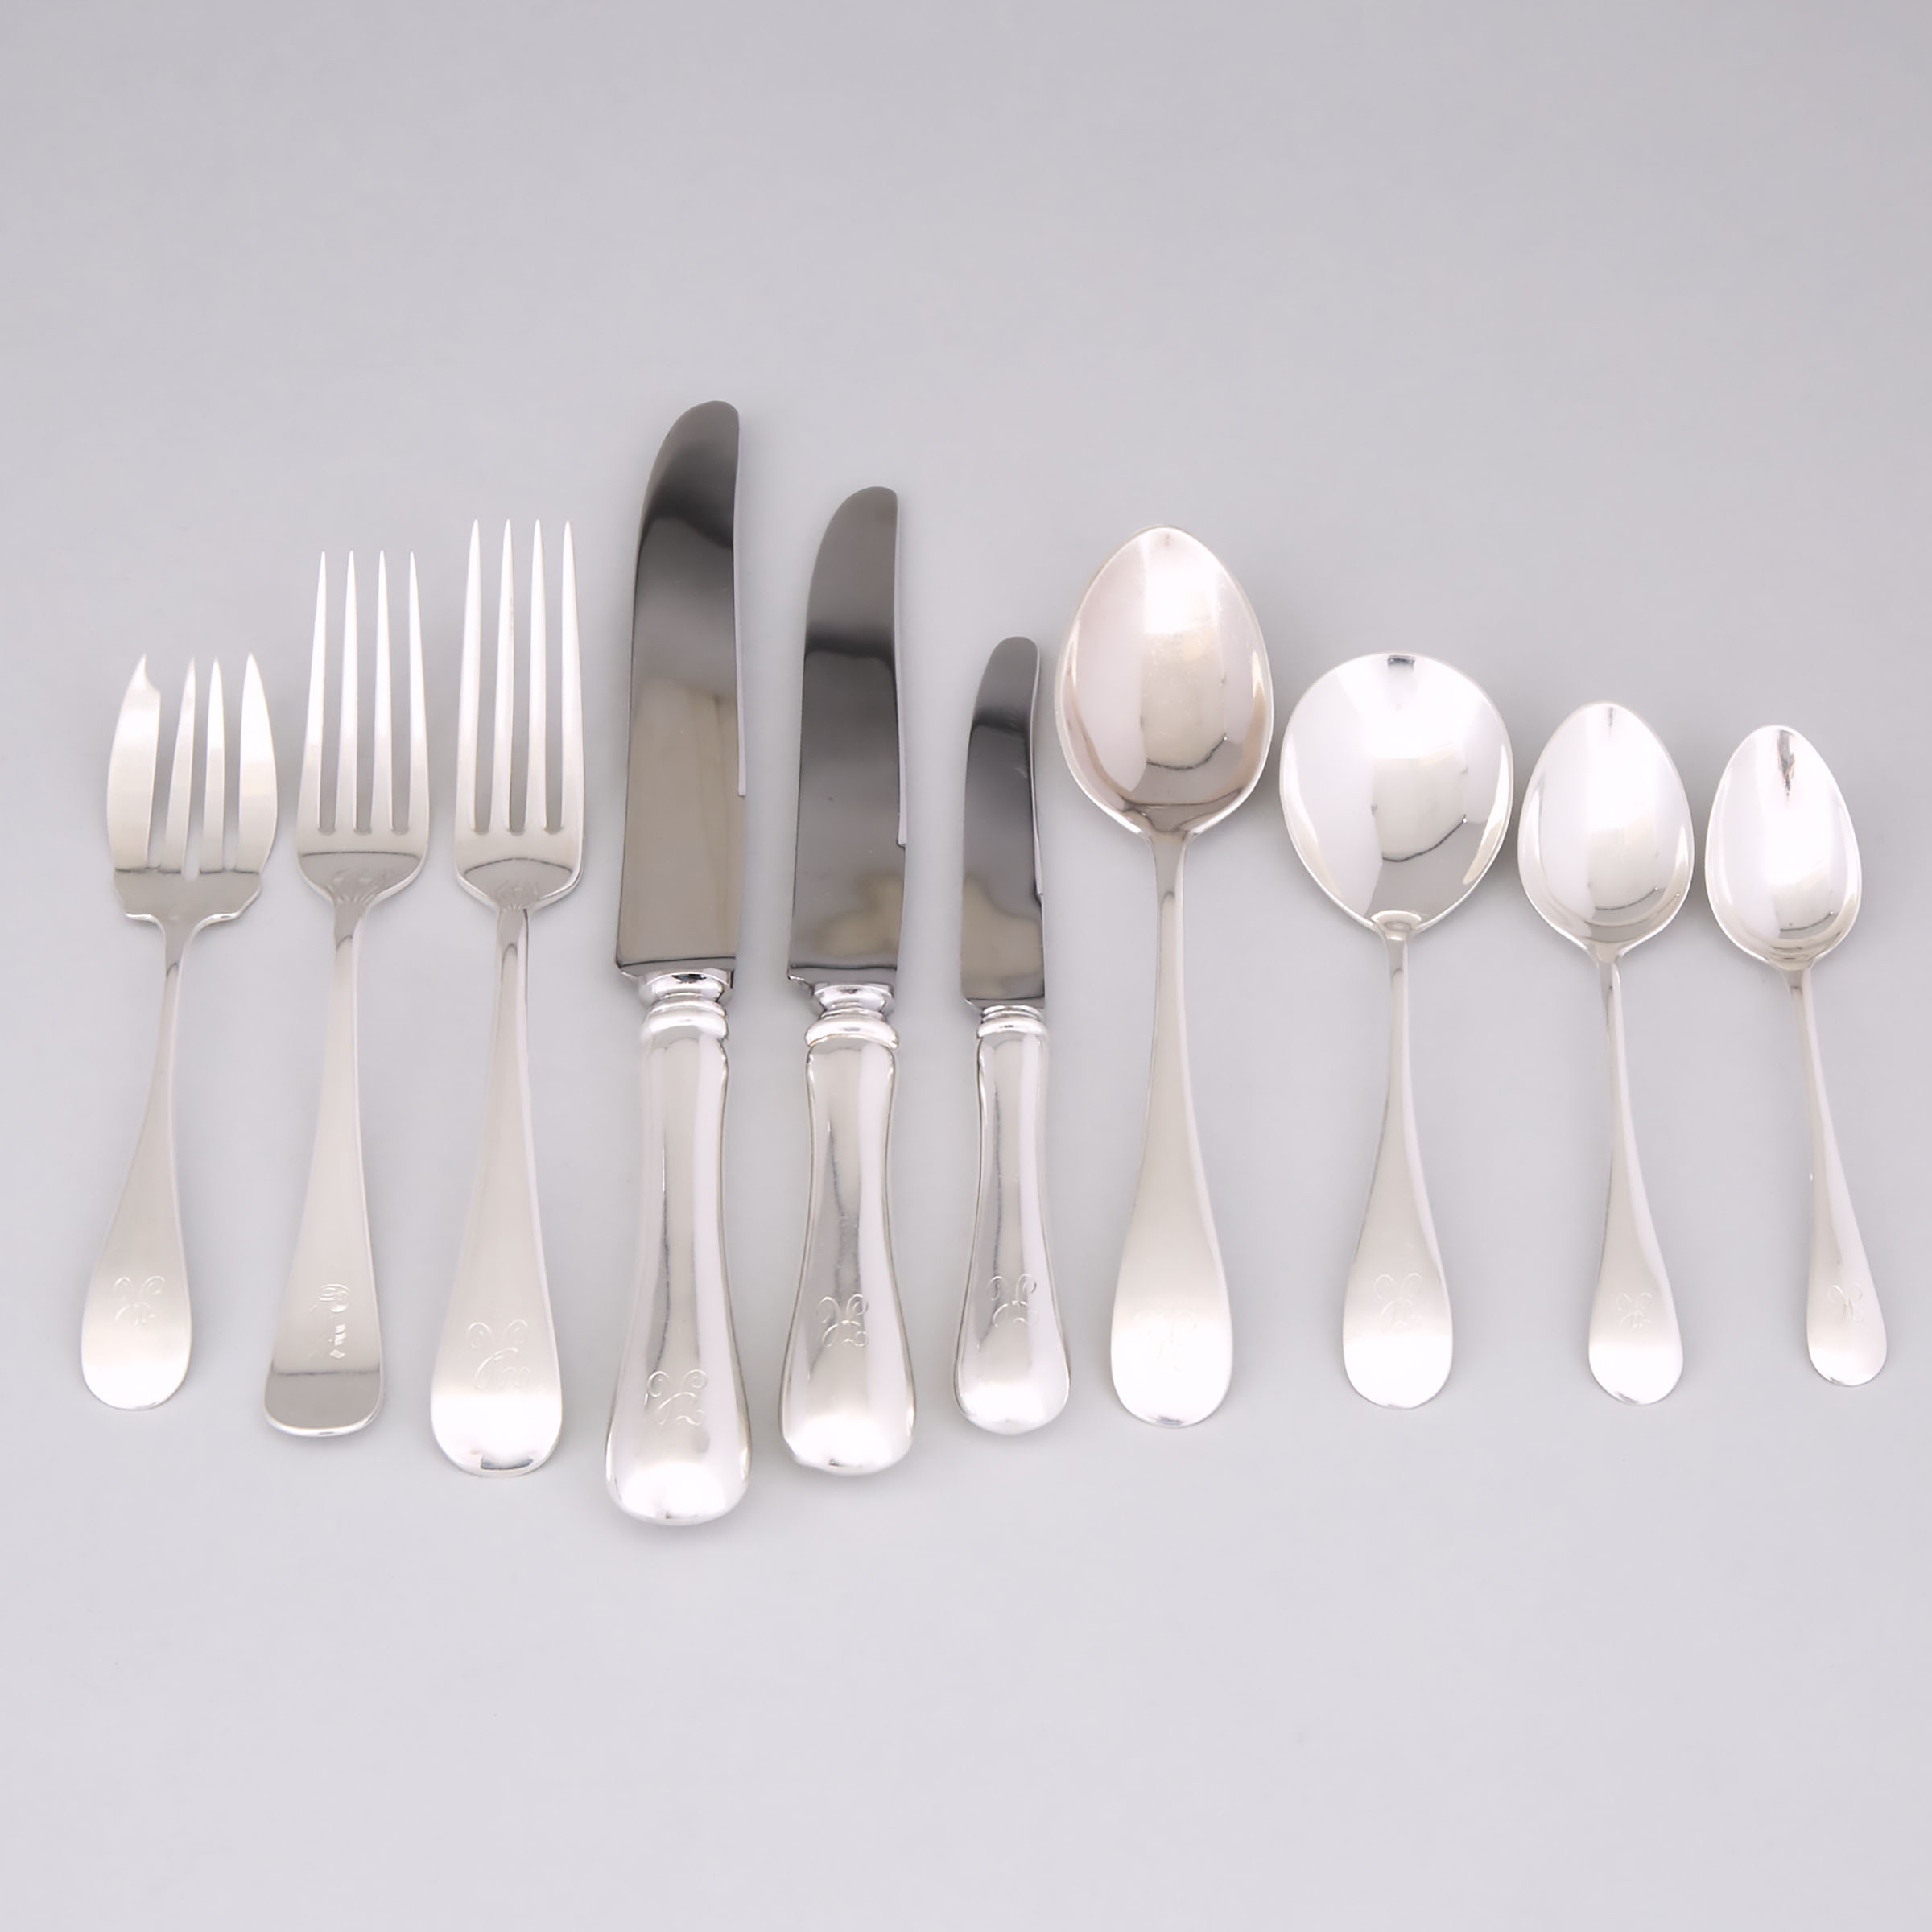 Canadian Silver Old English Pattern Flatware Service, Roden Brothers, Toronto, Ont., early 20th century